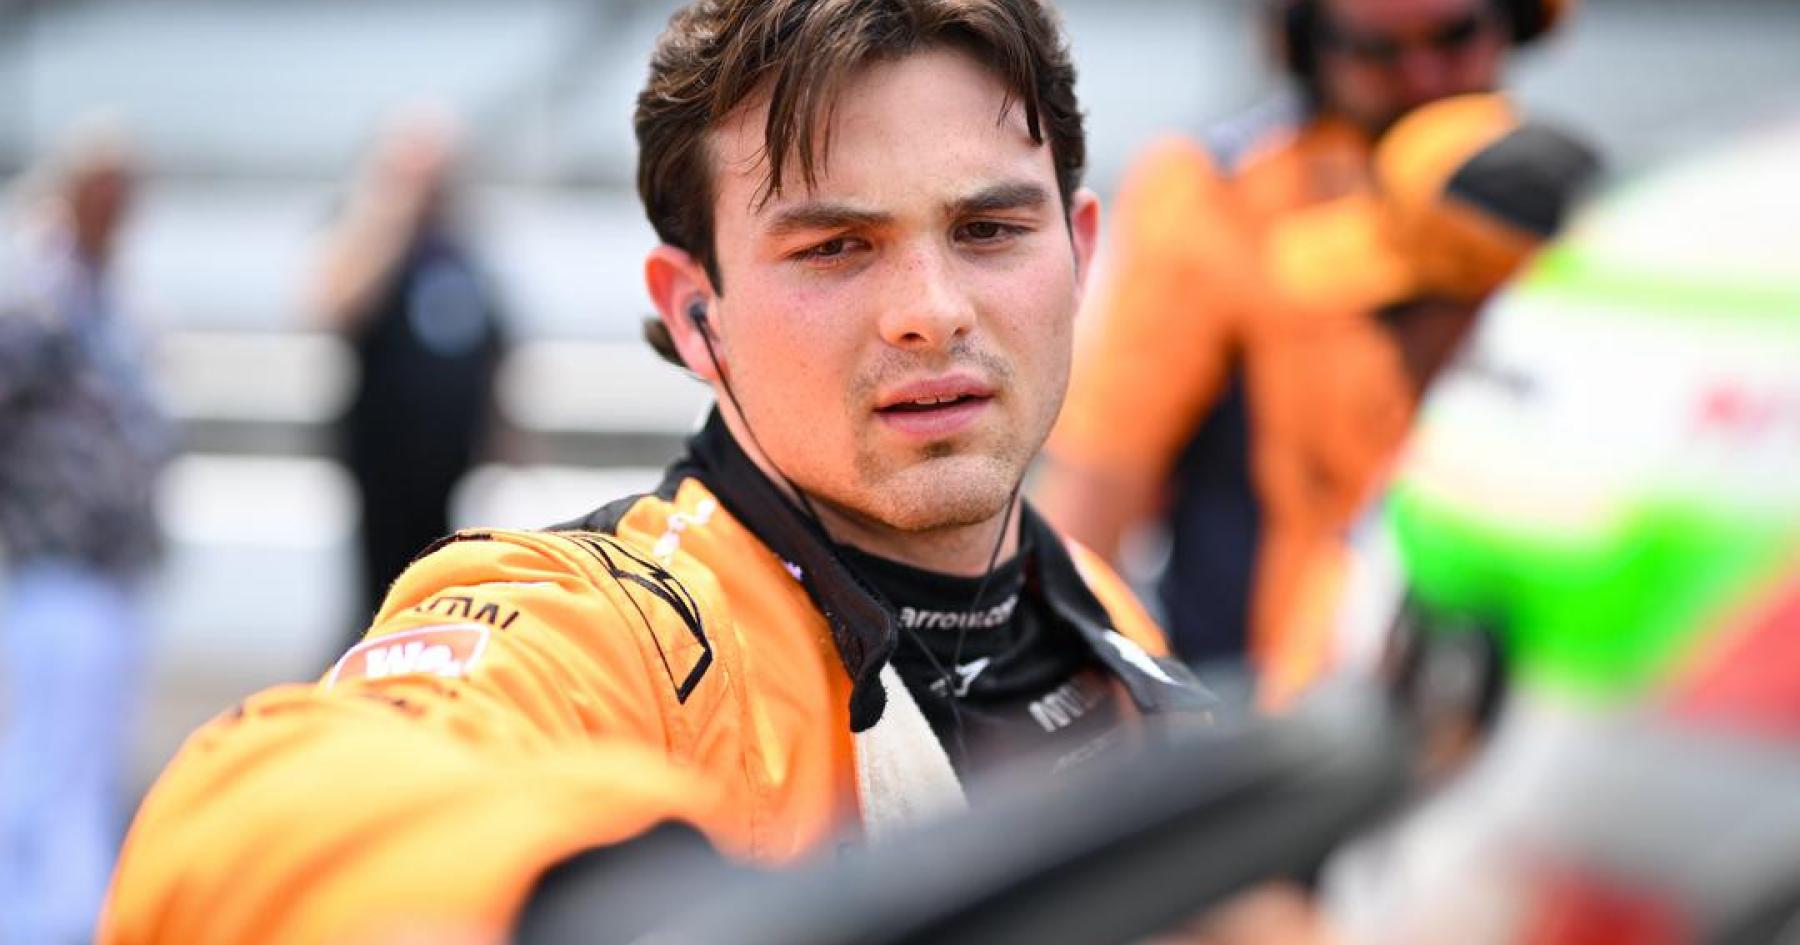 The Heartbreak of the Indy 500: O'Ward's Crushing Defeat in the Face of Newgarden's Victory